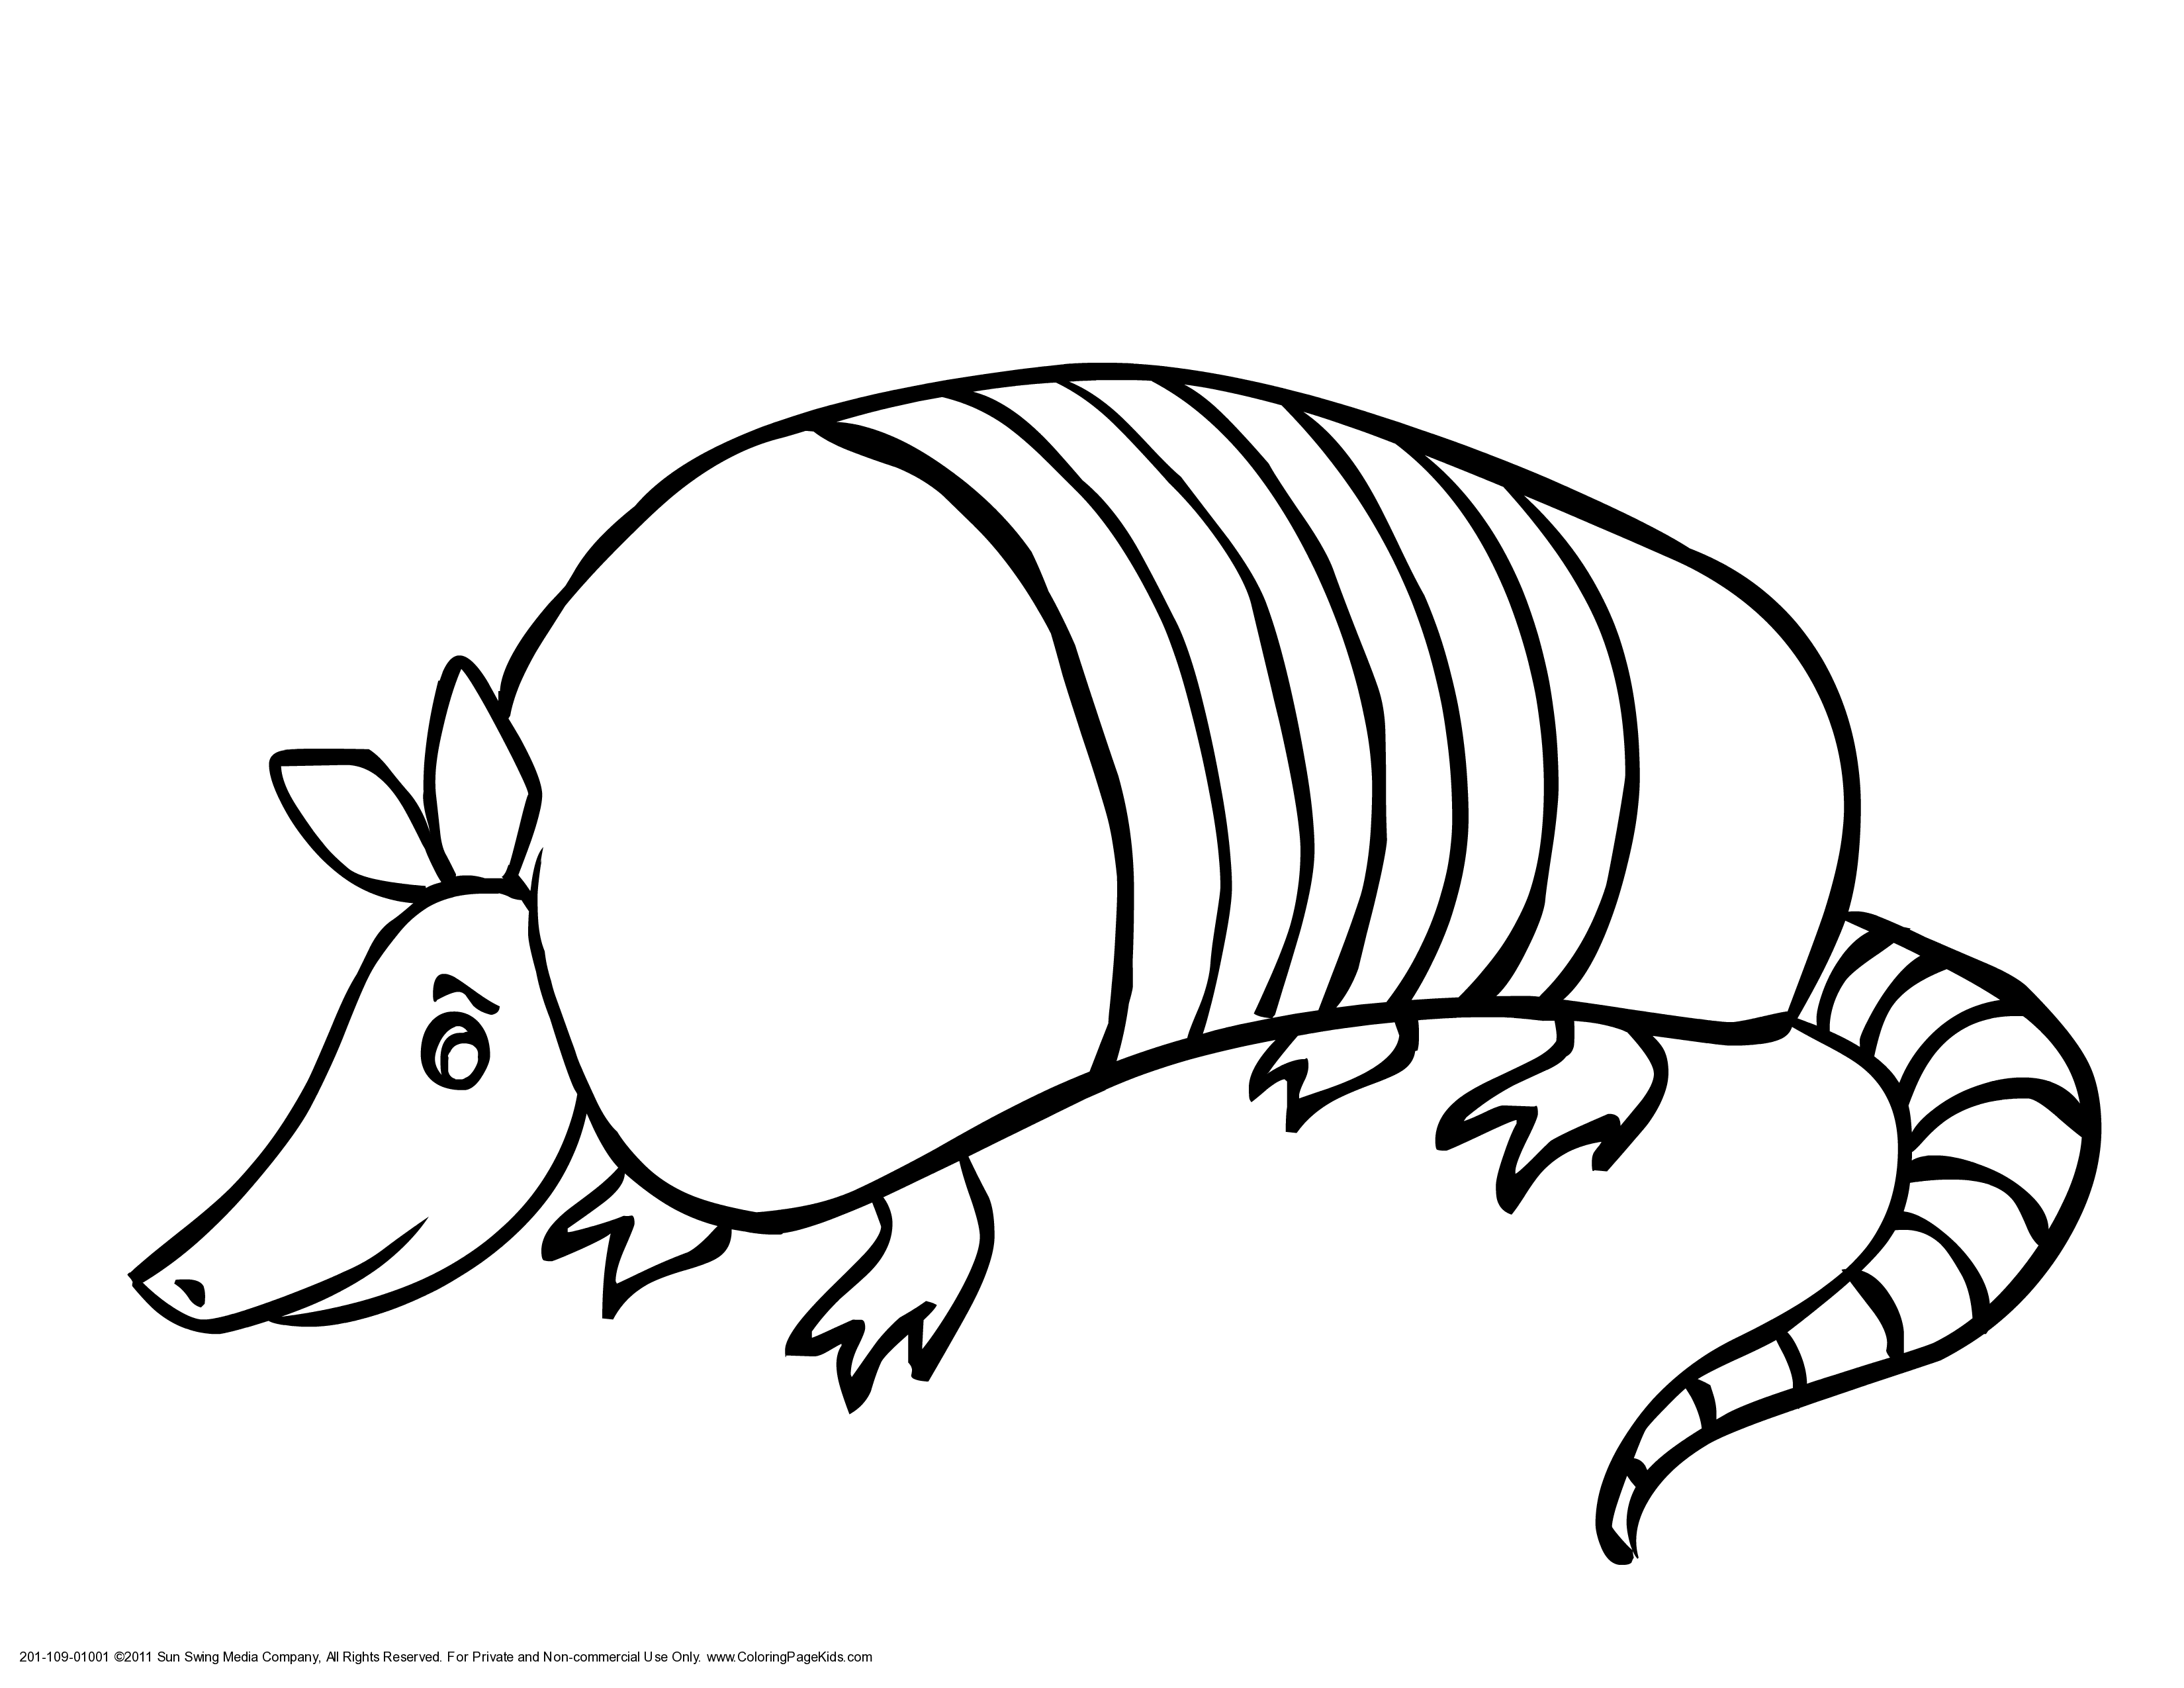 Printable texas unit pinterest. Armadillo clipart coloring page